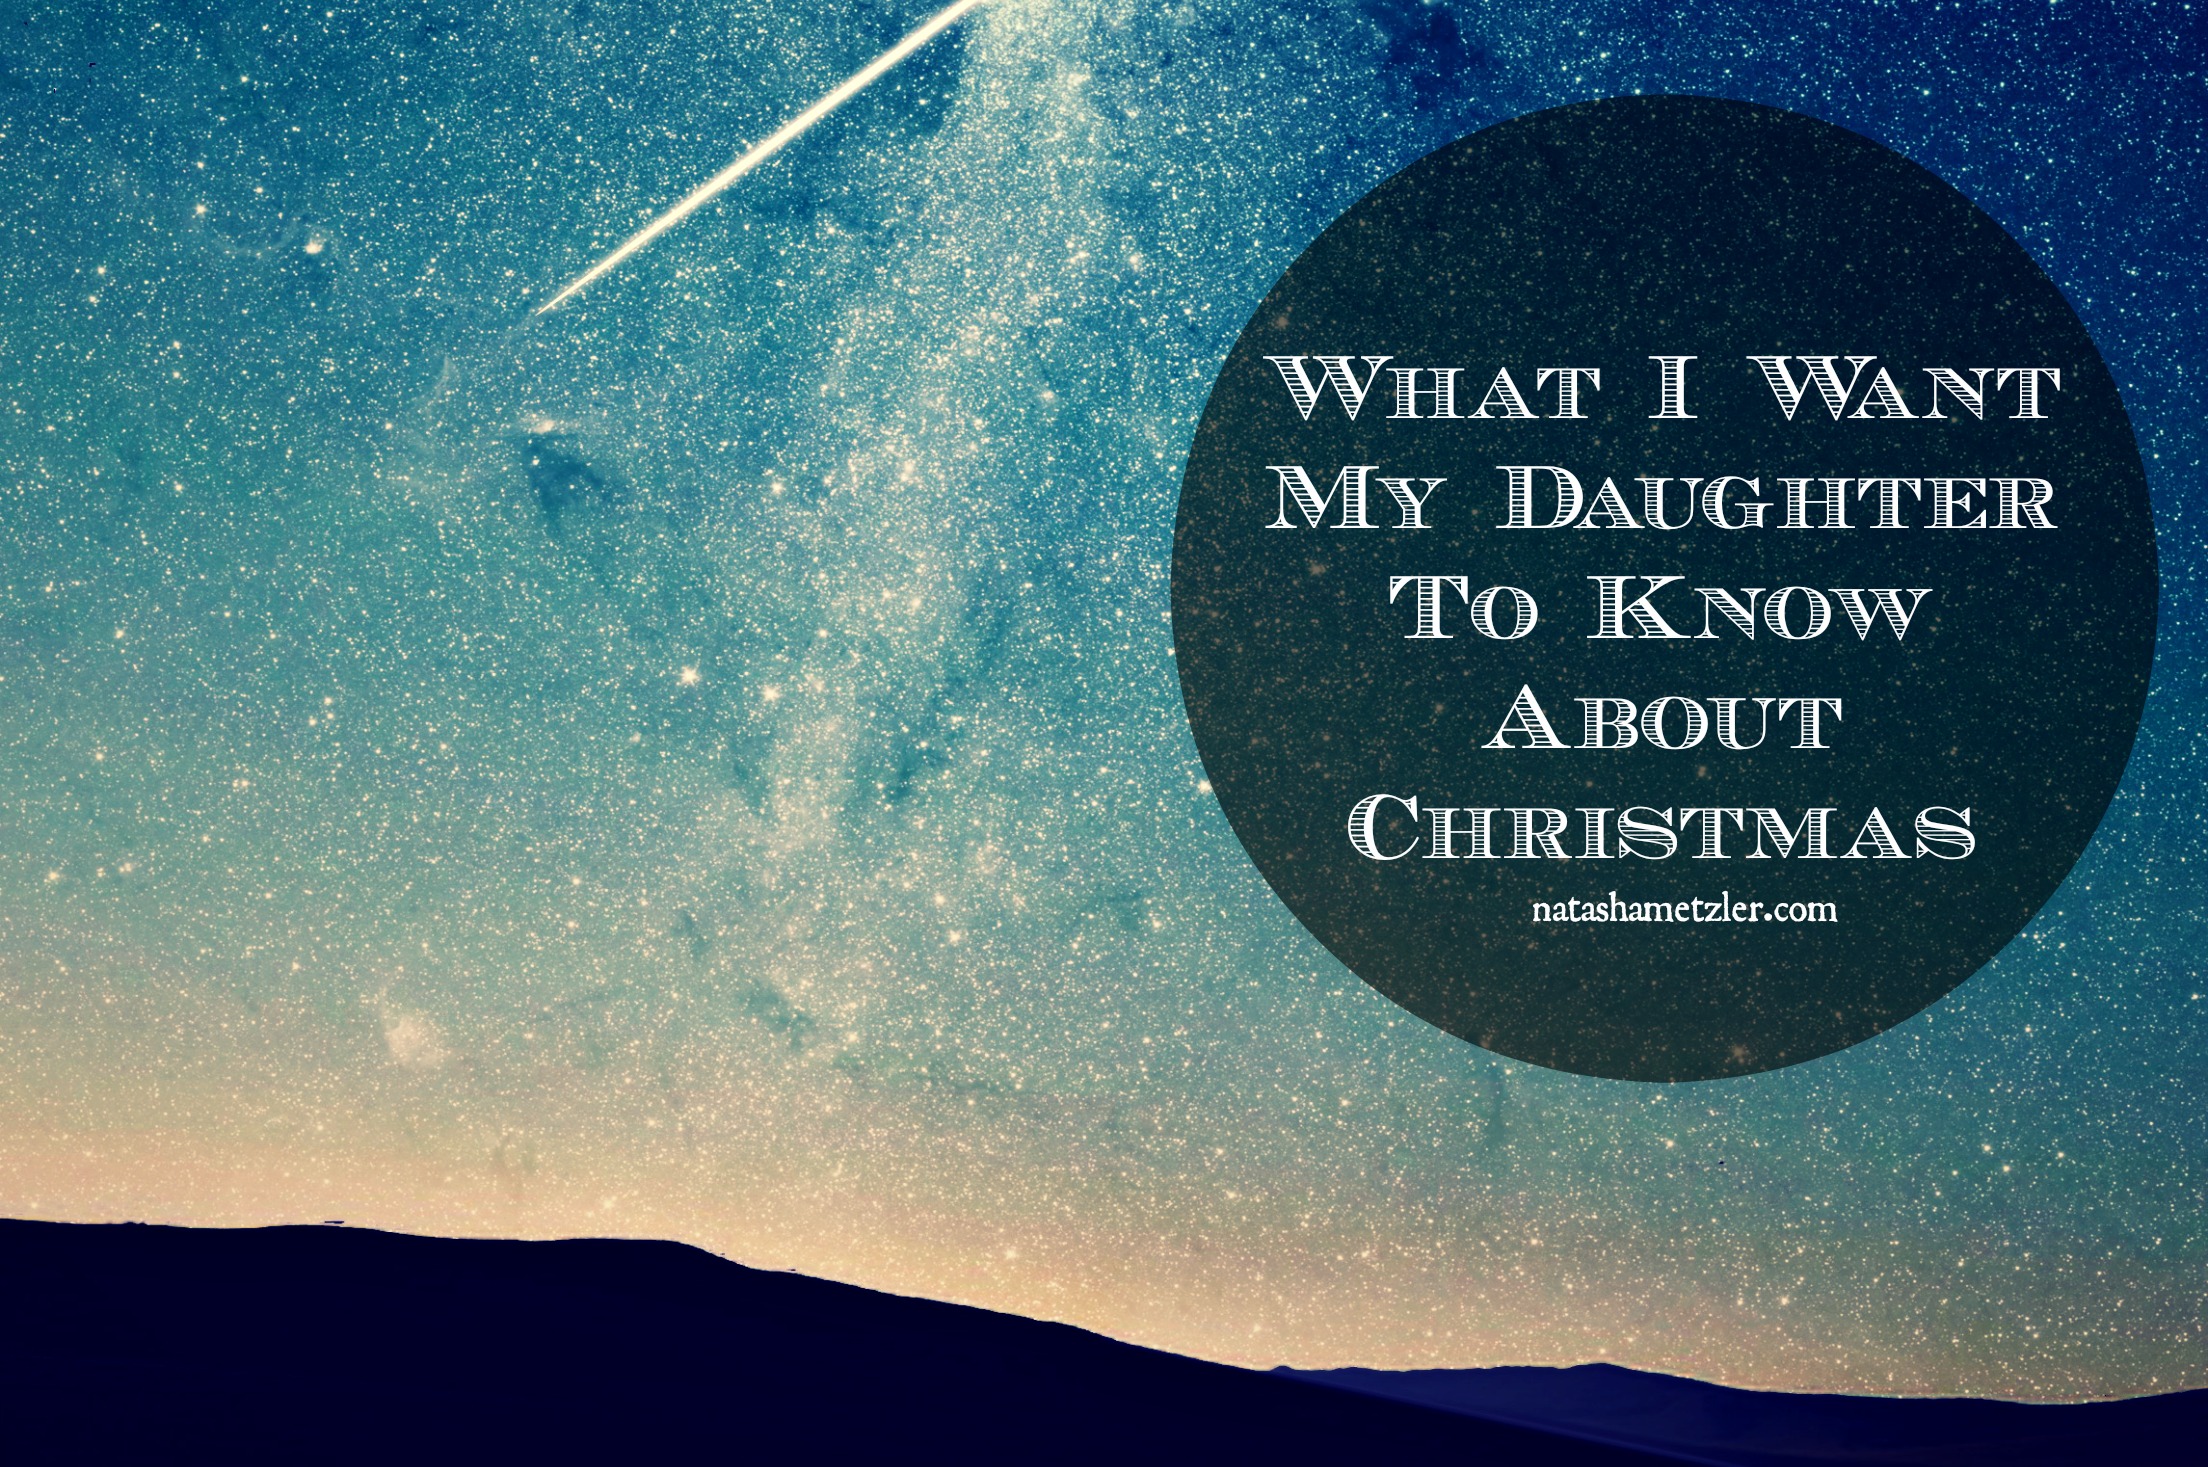 What I Want My Daughter to Know About Christmas